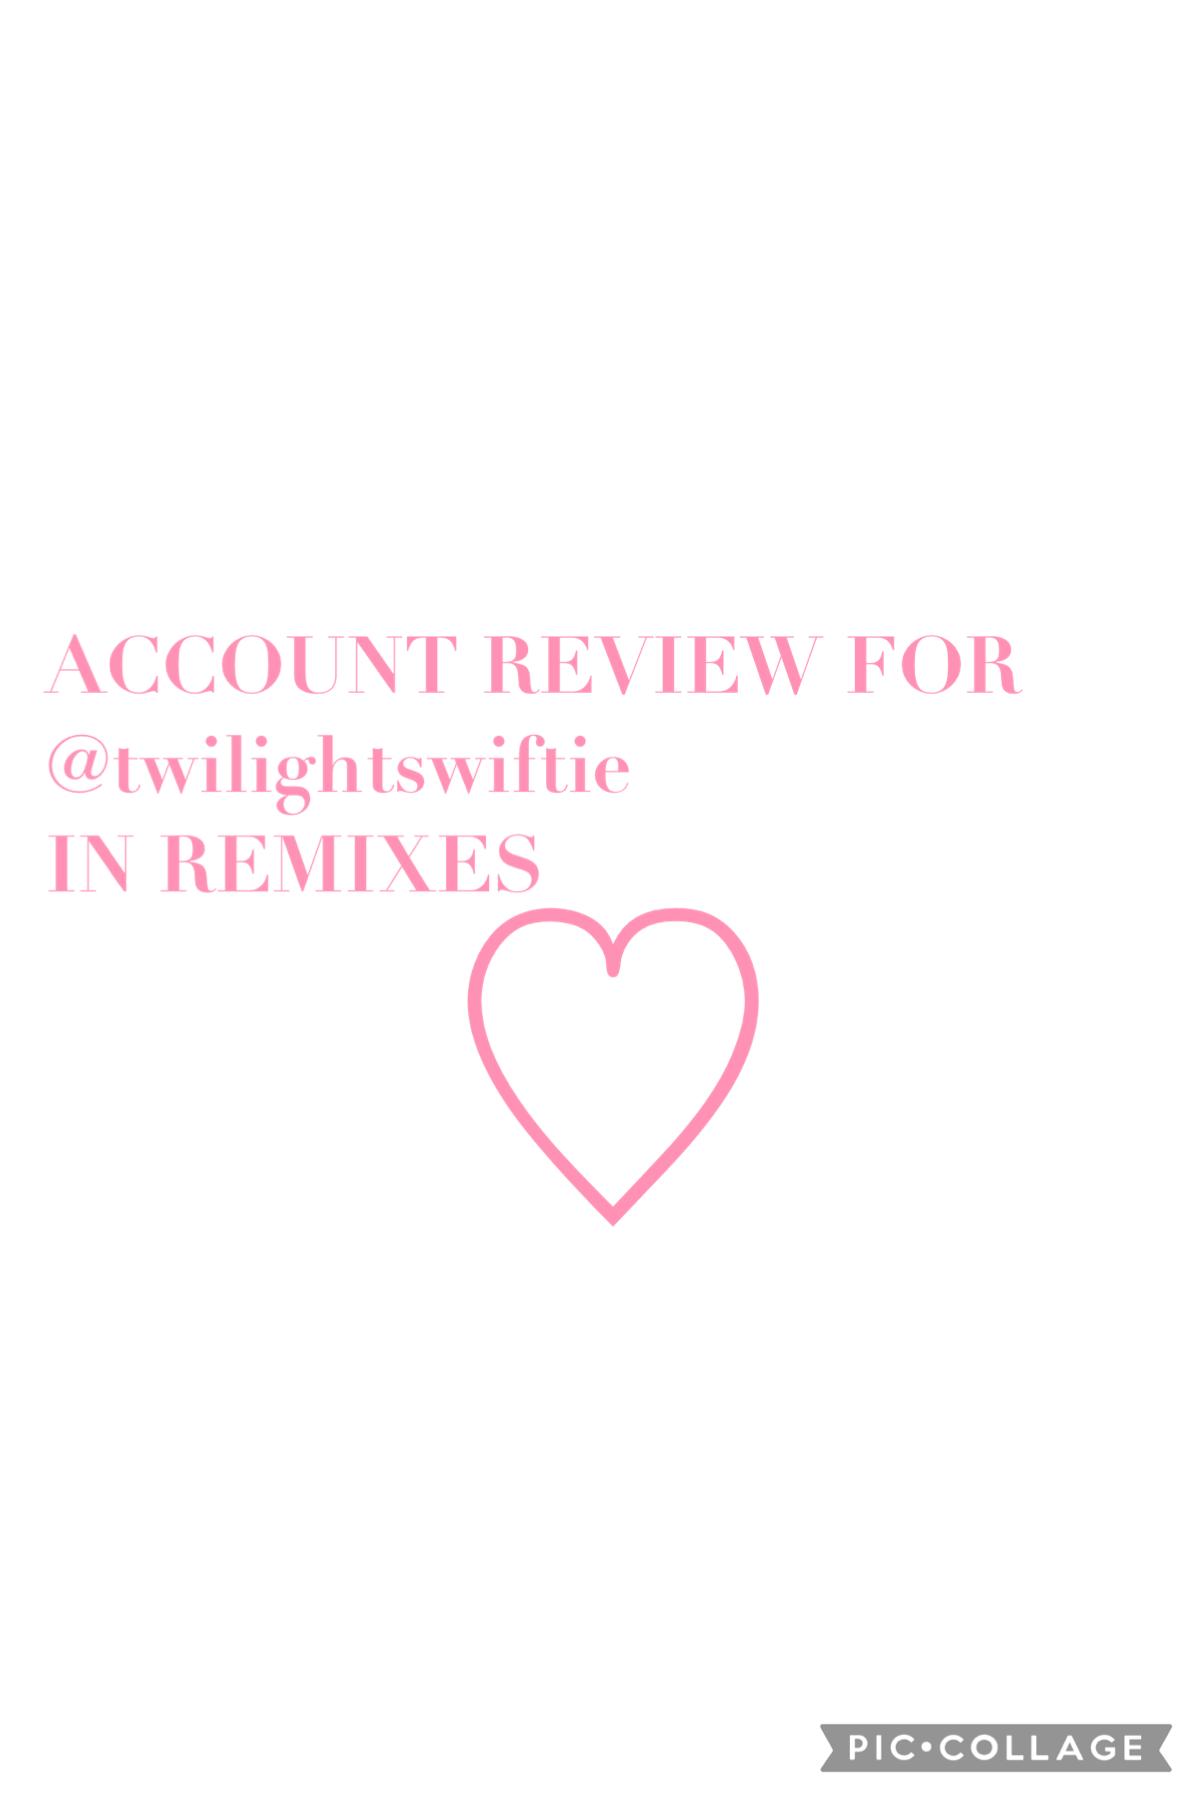 account review fro @twilightswiftie in remixes !! ♡ i'm so sorry for the wait :(